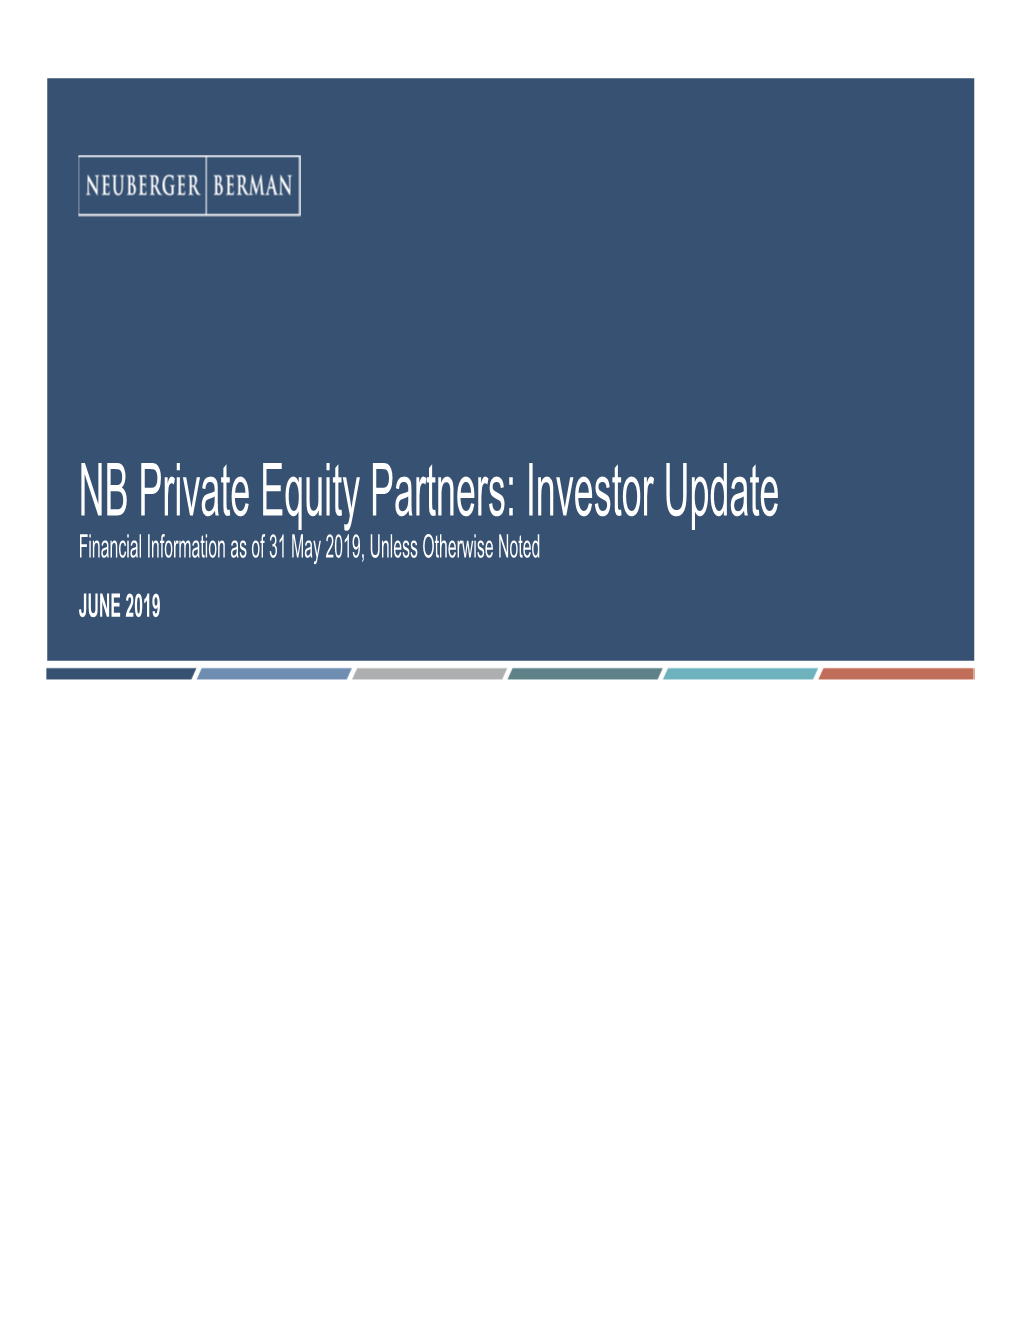 Investor Update Financial Information As of 31 May 2019, Unless Otherwise Noted JUNE 2019 NBPE Key Performance Highlights